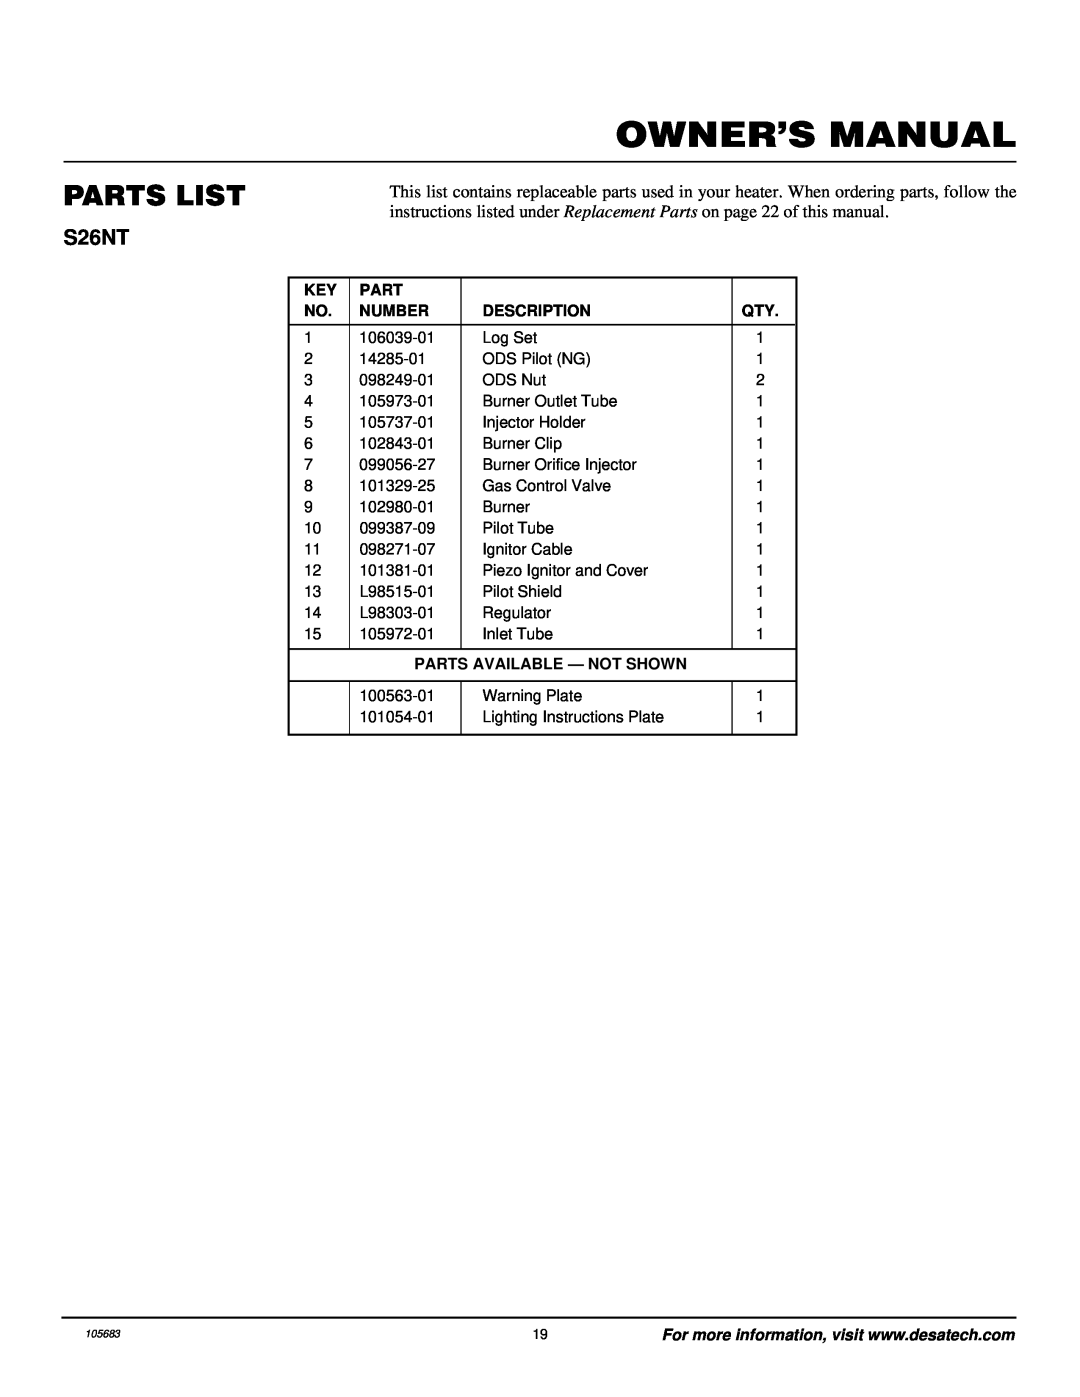 Desa S26NT installation manual Parts List, Owner’S Manual, Number, Description, Parts Available - Not Shown 